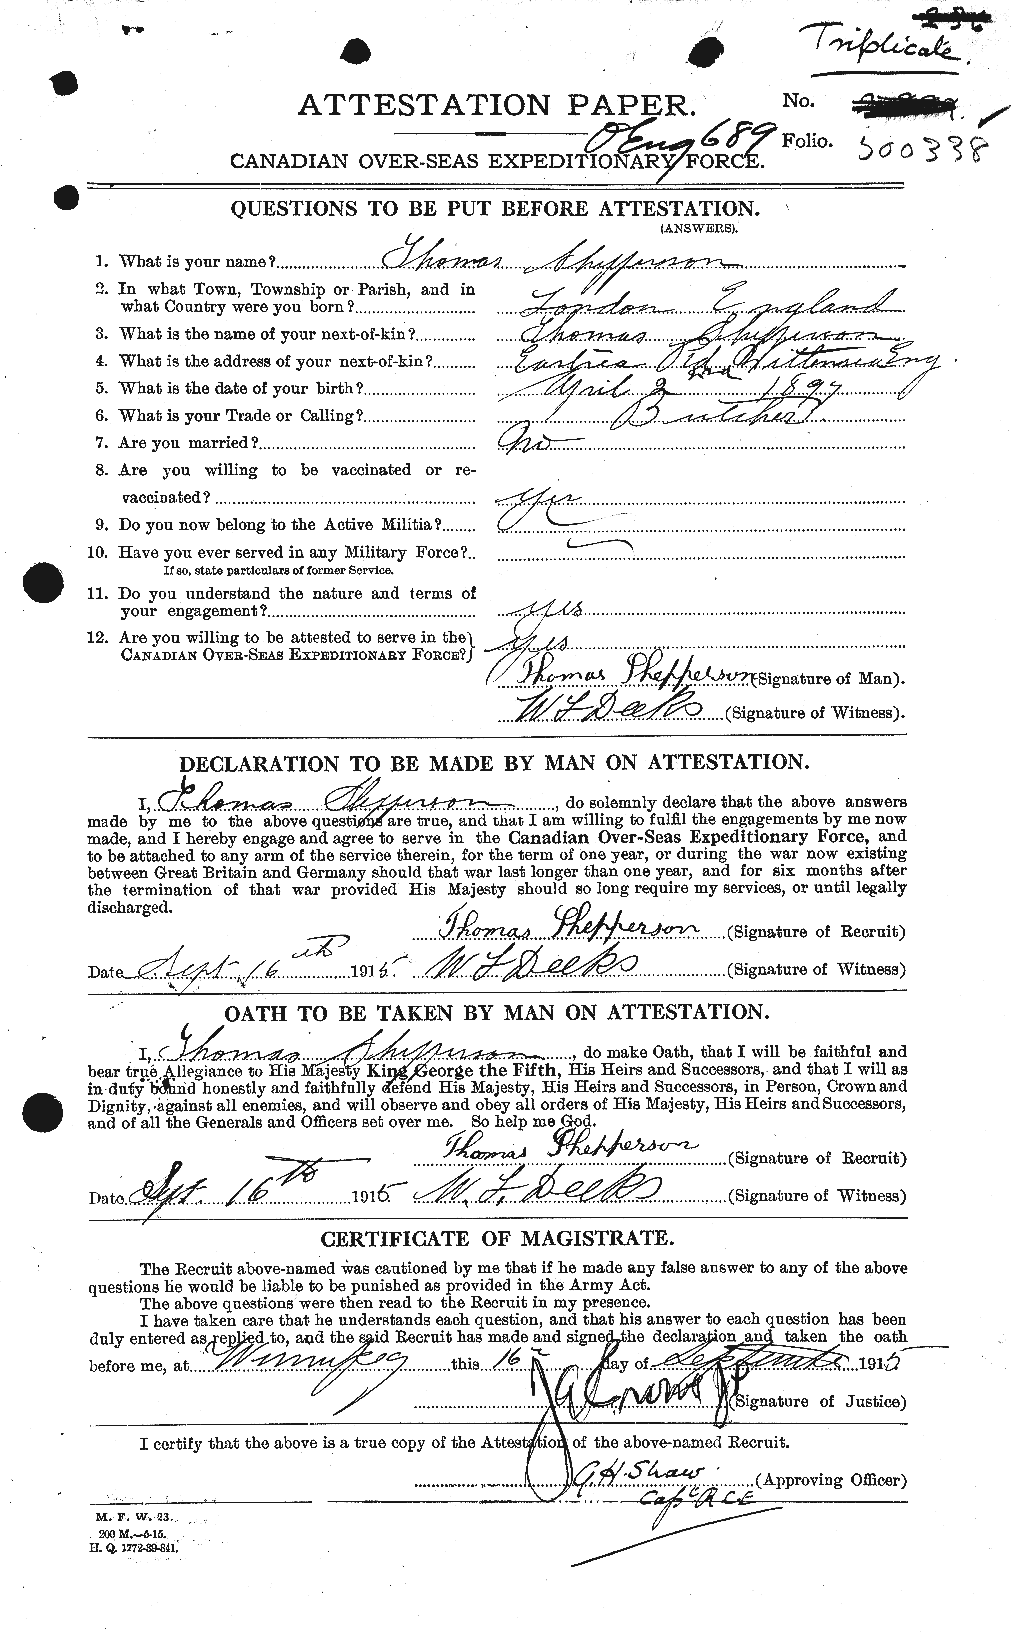 Personnel Records of the First World War - CEF 093315a